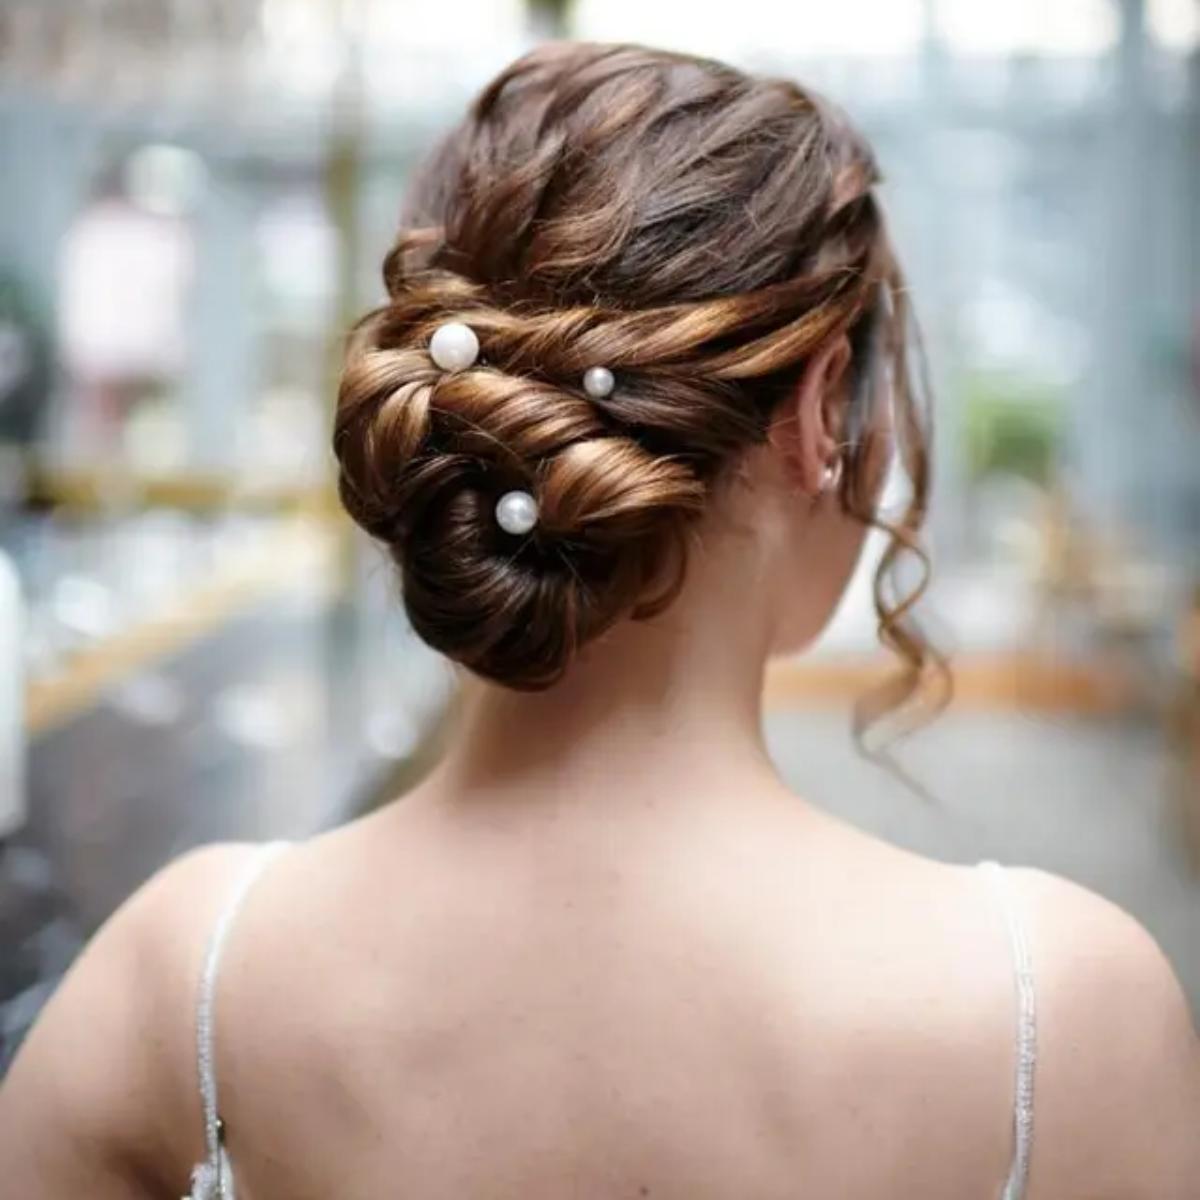 HOW TO: SIMPLE UPDO | Bridesmaid Hairstyles - YouTube